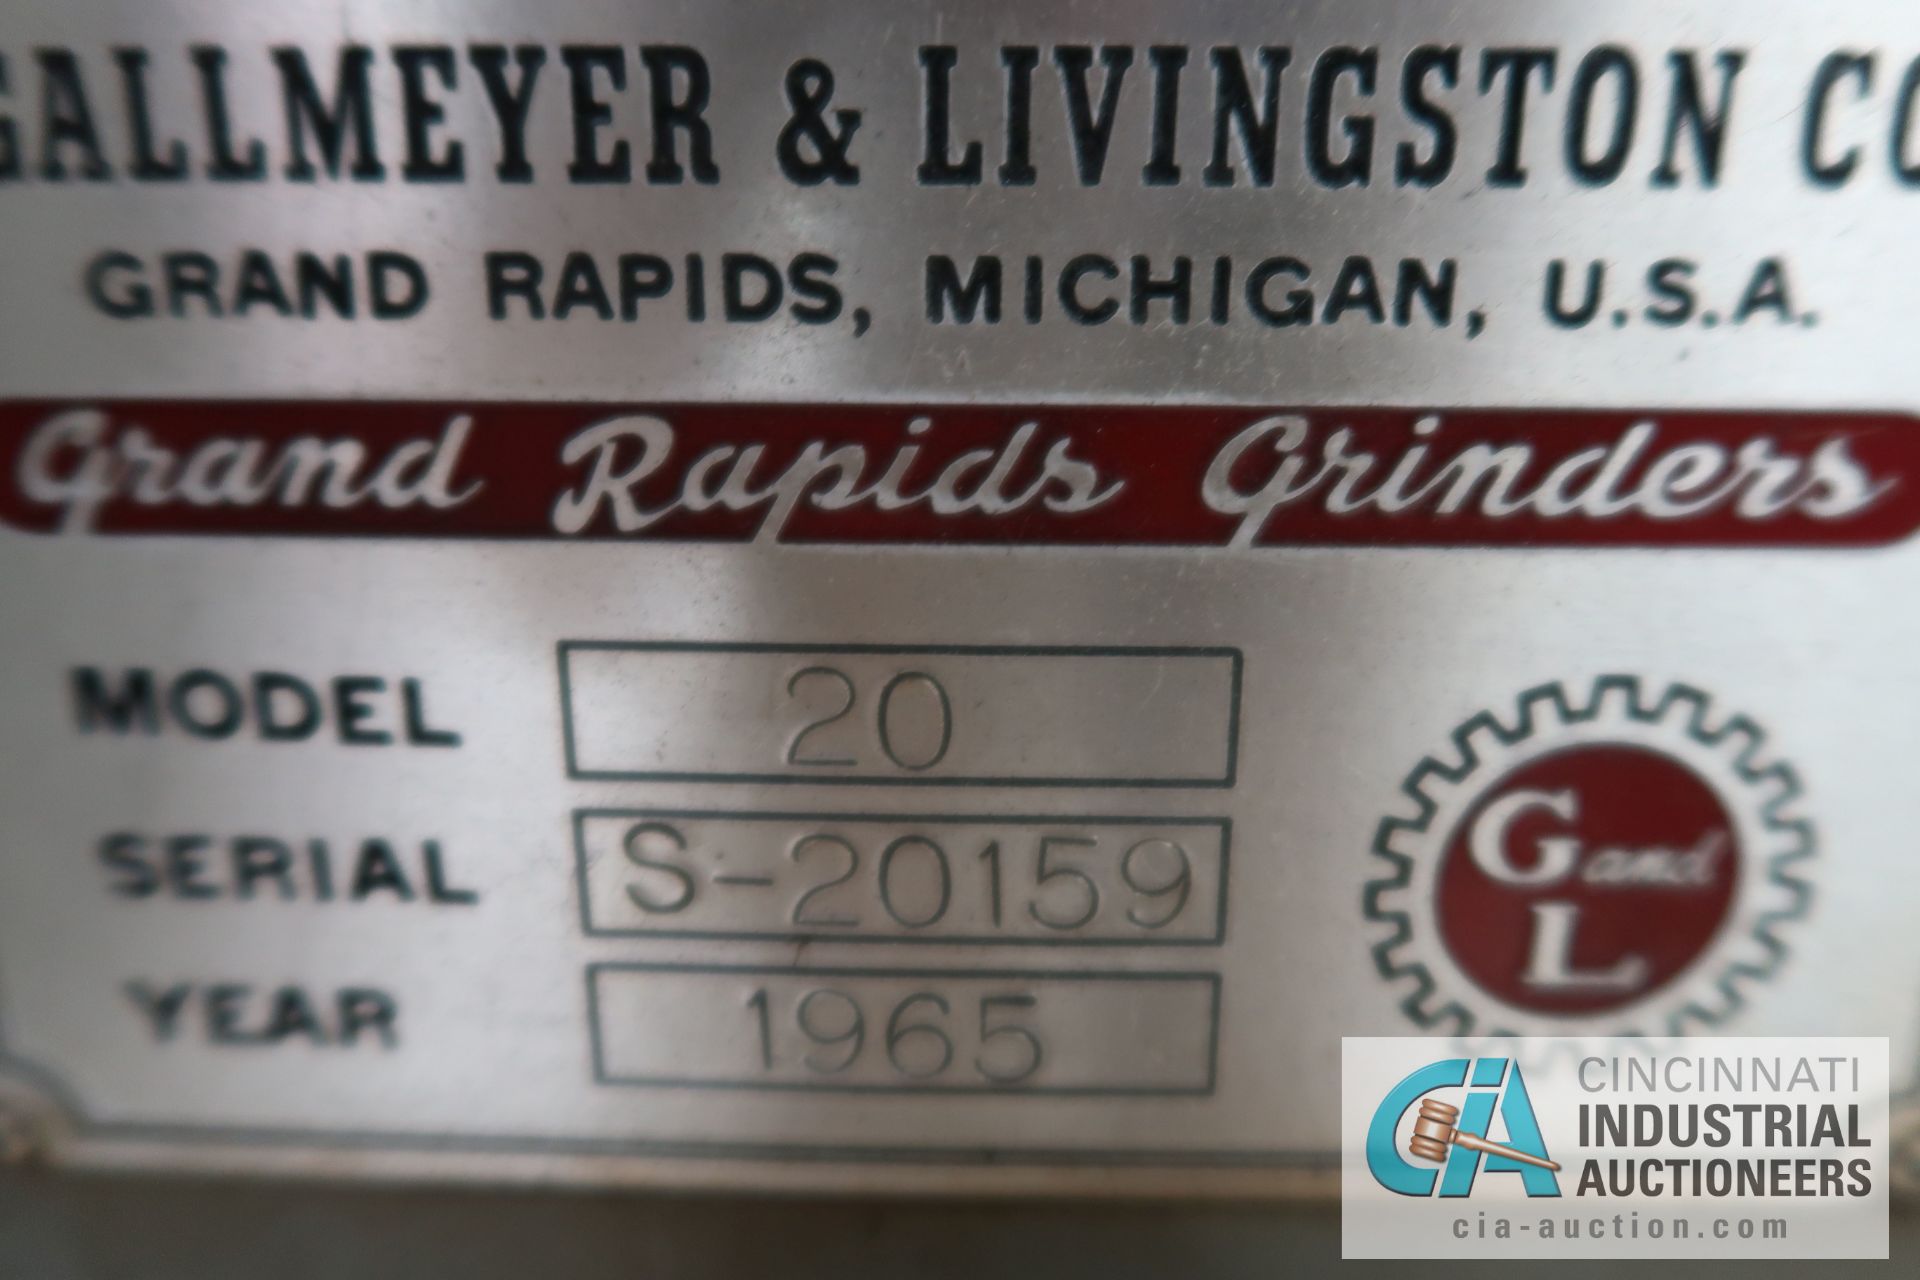 6" X 18" GALLMEYER AND LIVINGSTON MODEL 20 HAND FEED SURFACE GRINDER; S/N S-20159 *NEW 1965* - Image 7 of 7